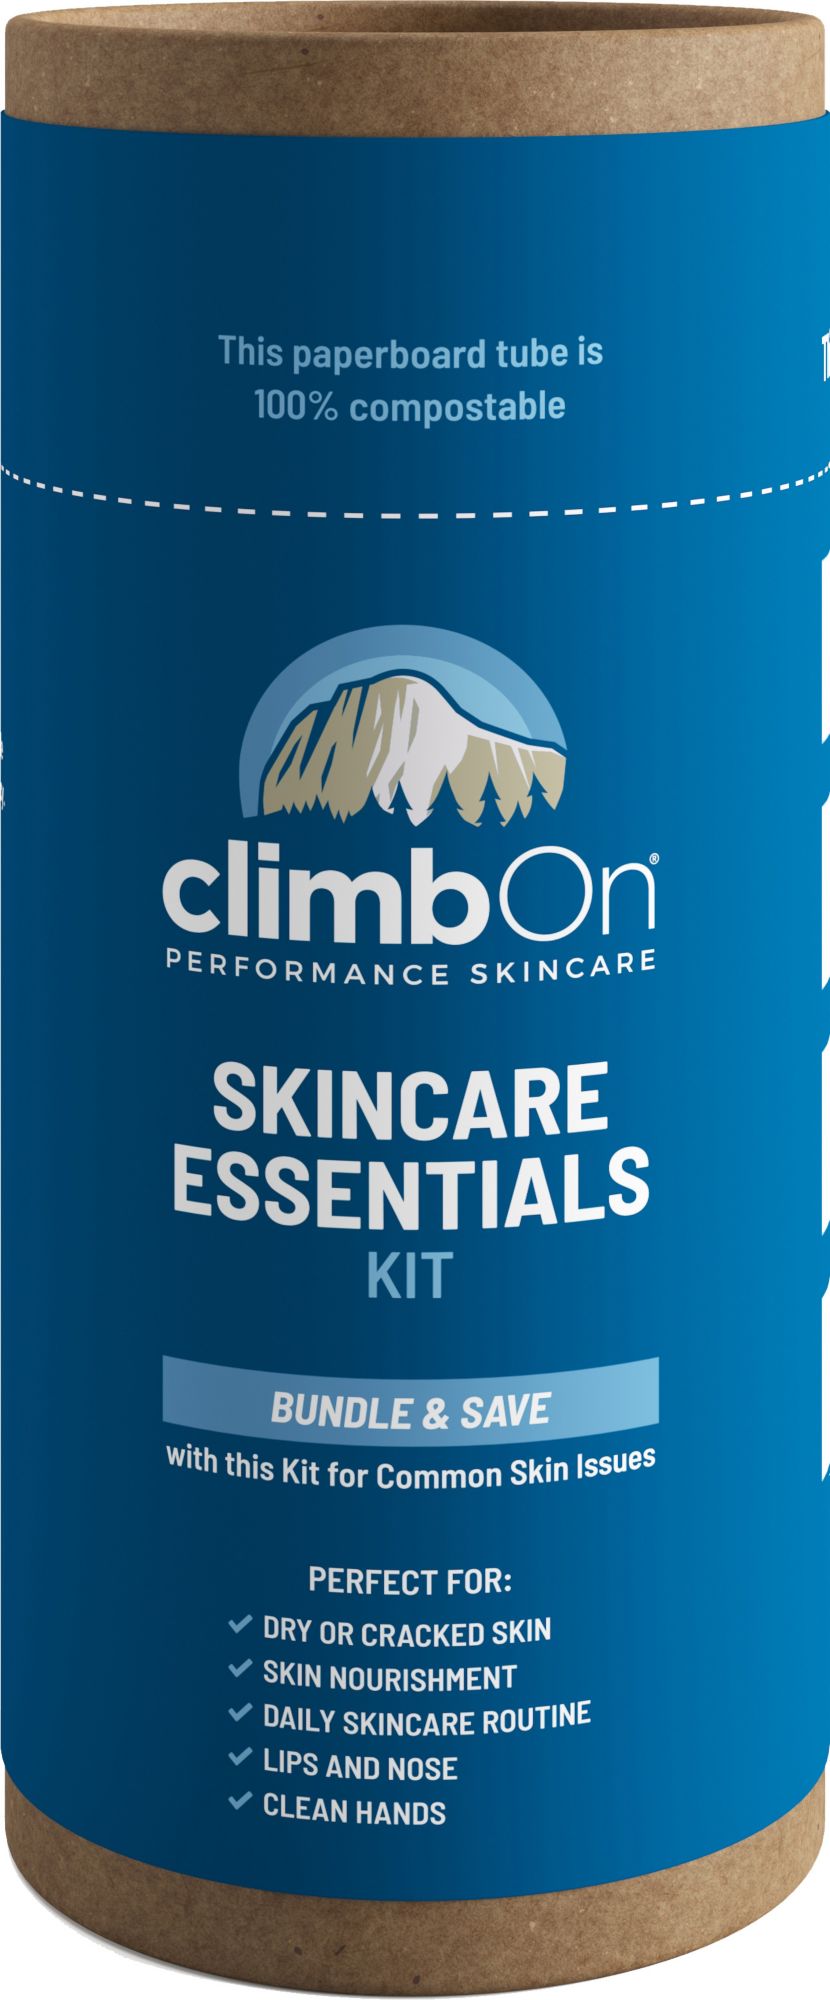 Photos - Outdoor Furniture climbOn Skincare Essentials Kit 21MWOUSKNCRSSNTLSCAC